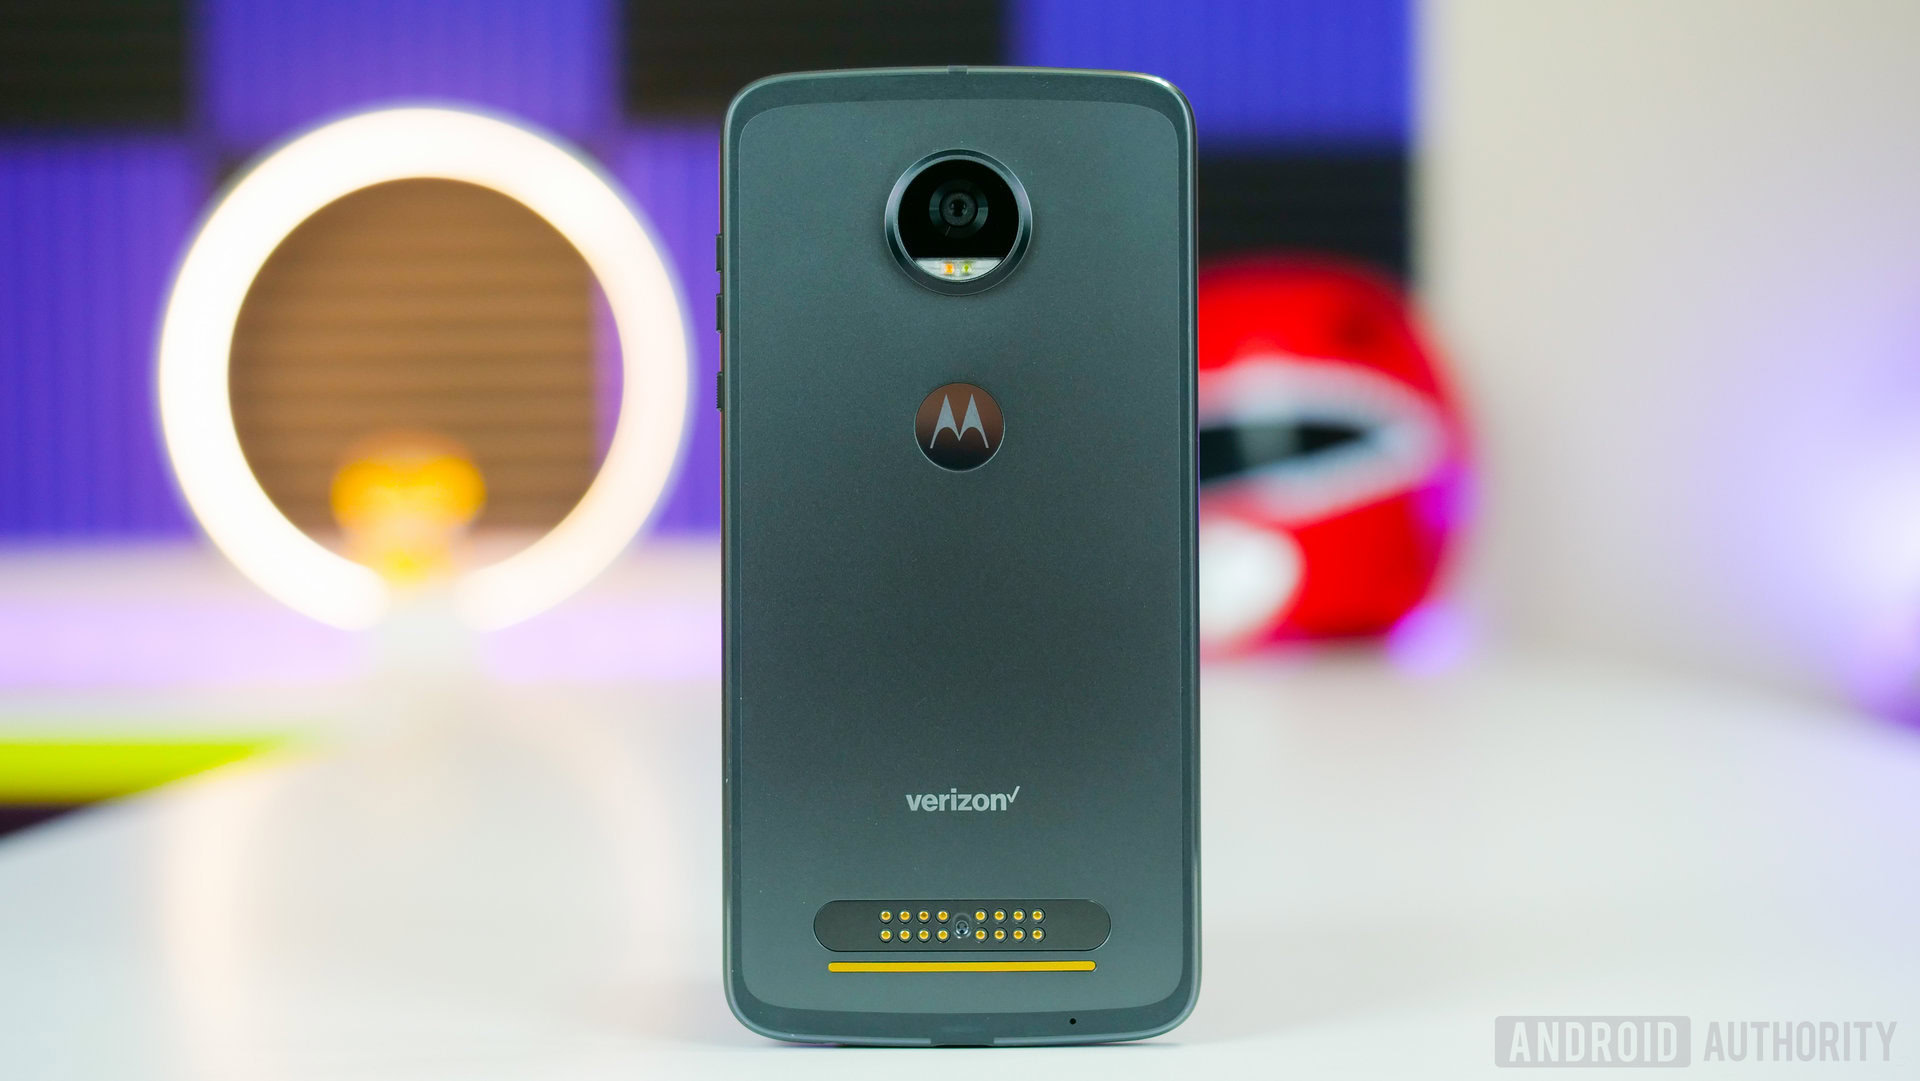 Moto Z Play review: Playmodo: Display, connectivity, battery life